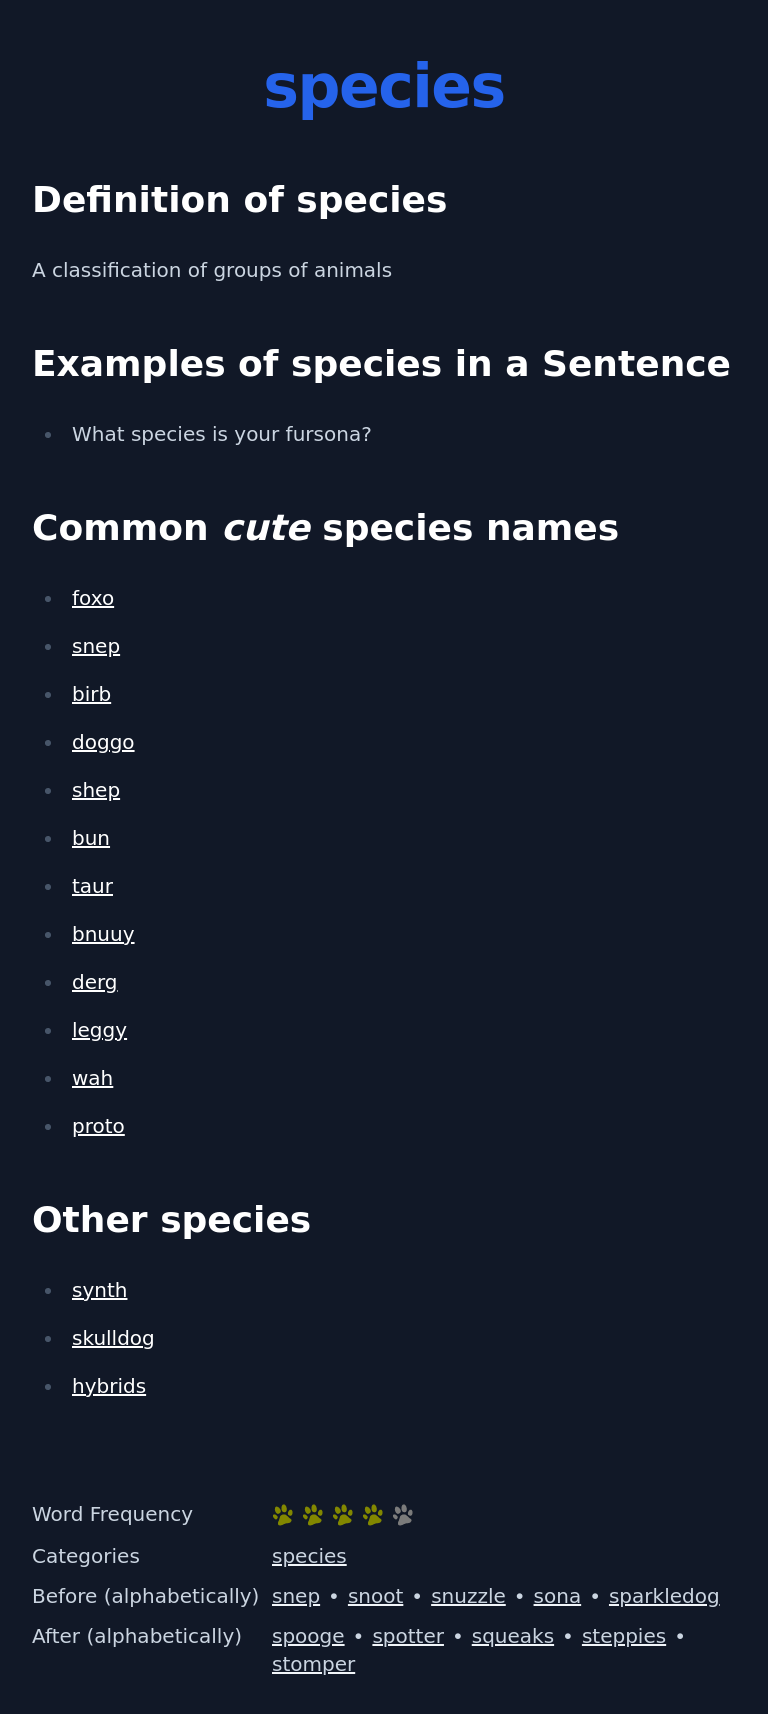 Definition of species
 A classification of groups of animals
 Examples of species in a Sentence
 What species is your fursona?
 Common cute species names
 foxo
 snep
 birb
 doggo
 shep
 bun
 taur
 bnuuy
 derg
 leggy
 wah
 proto
 Other species
 synth
 skulldog
 hybrids